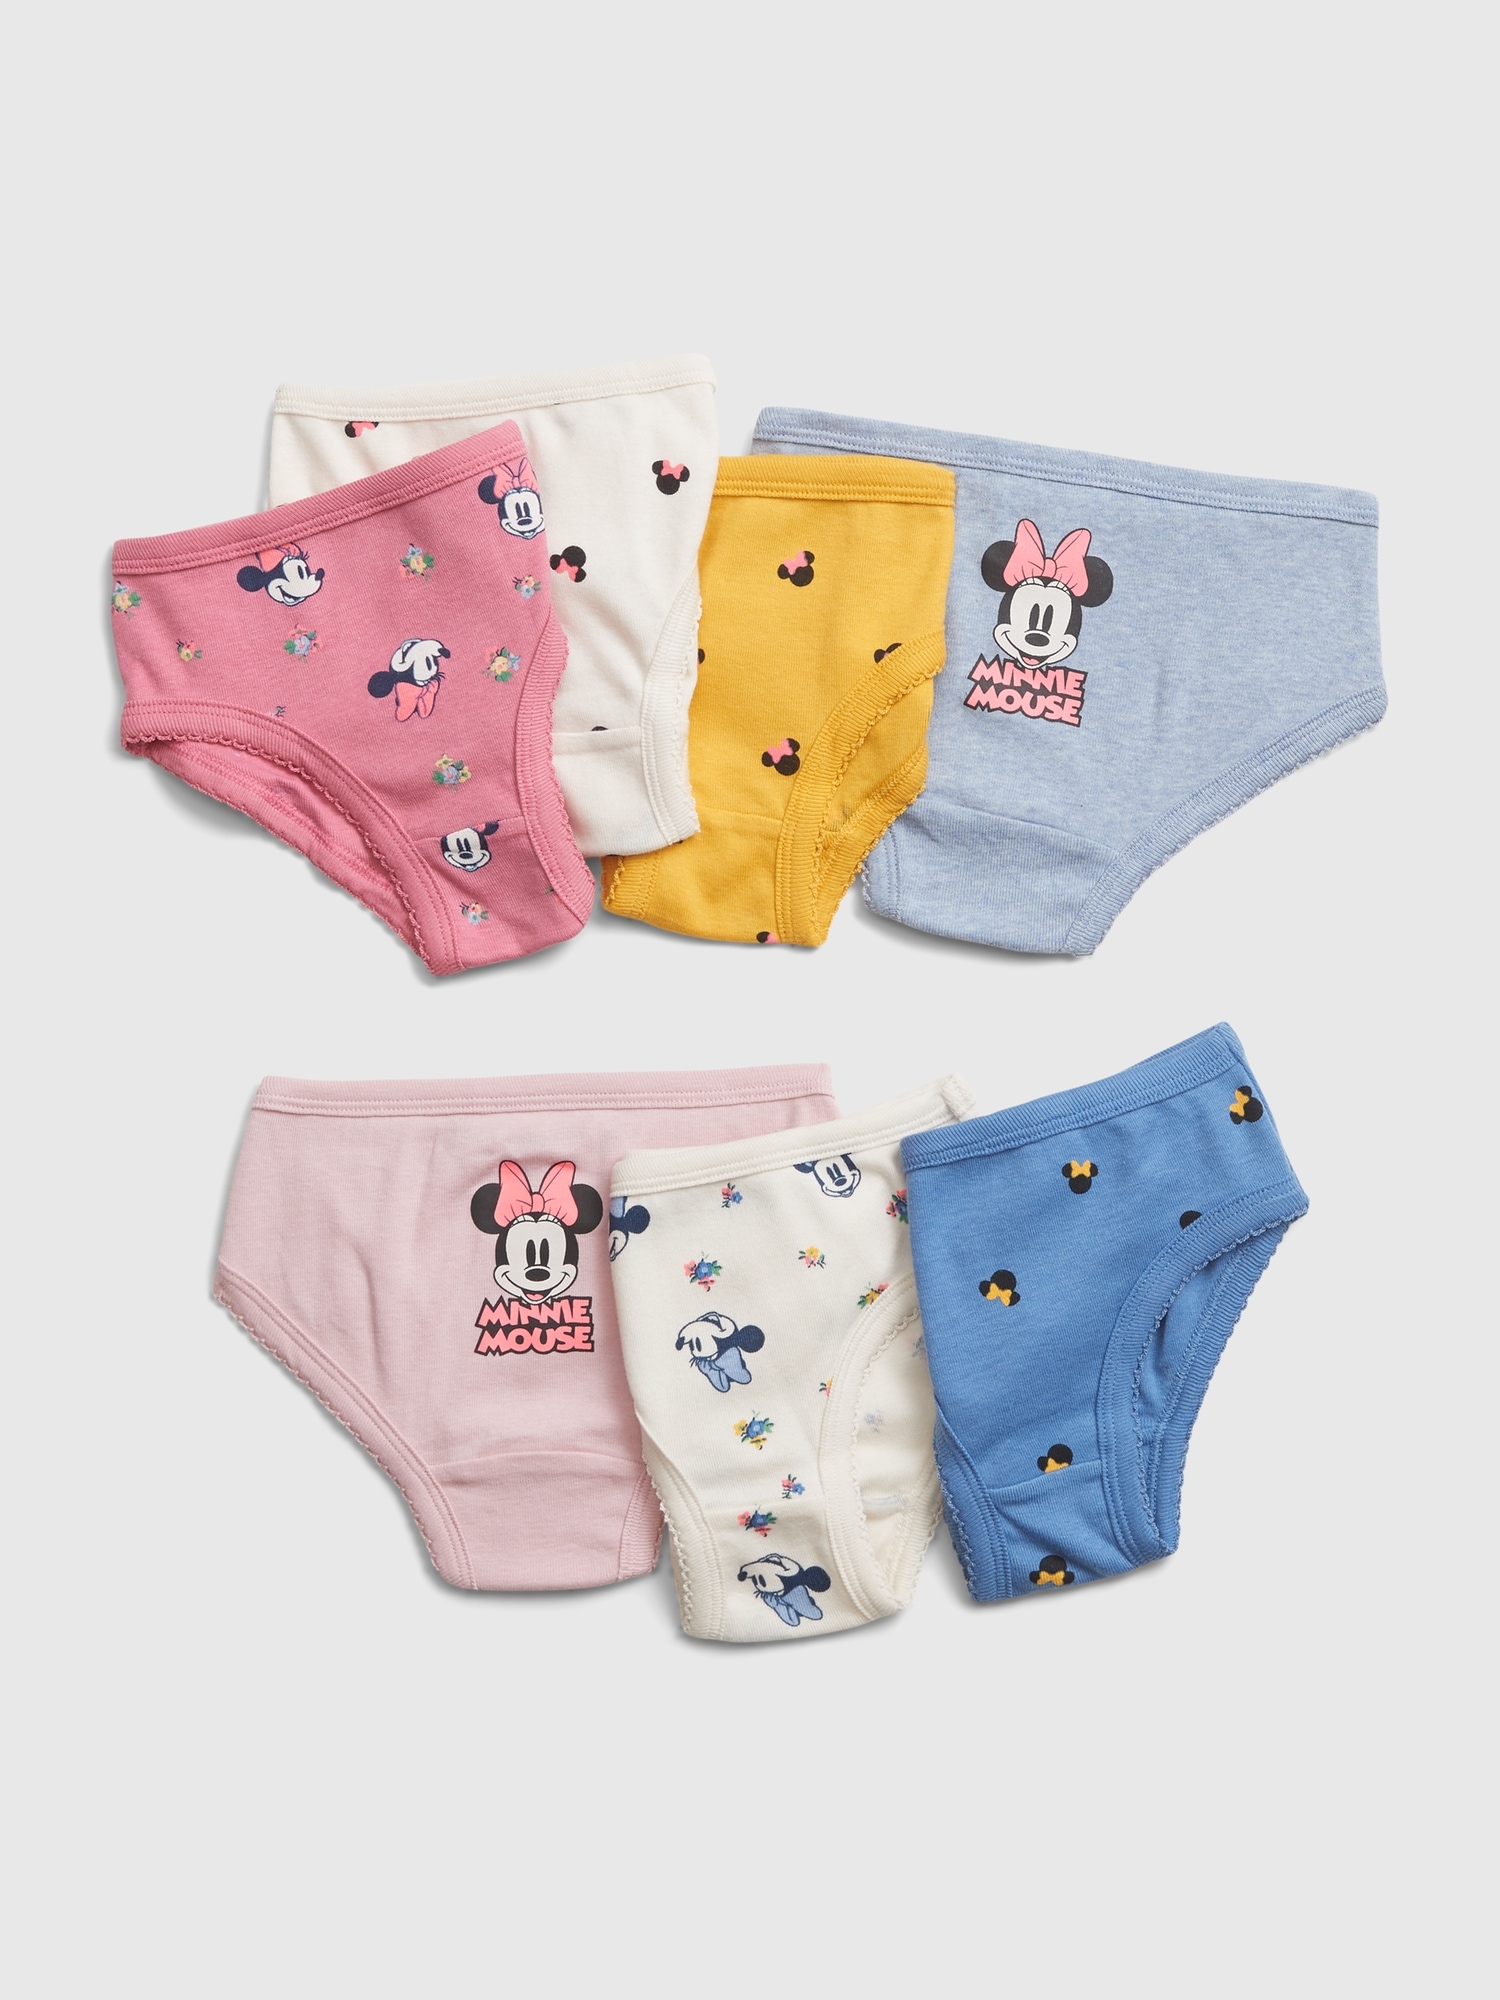 Disney Mickey Mouse and Minnie Mouse Briefs for Women Briefs Soft